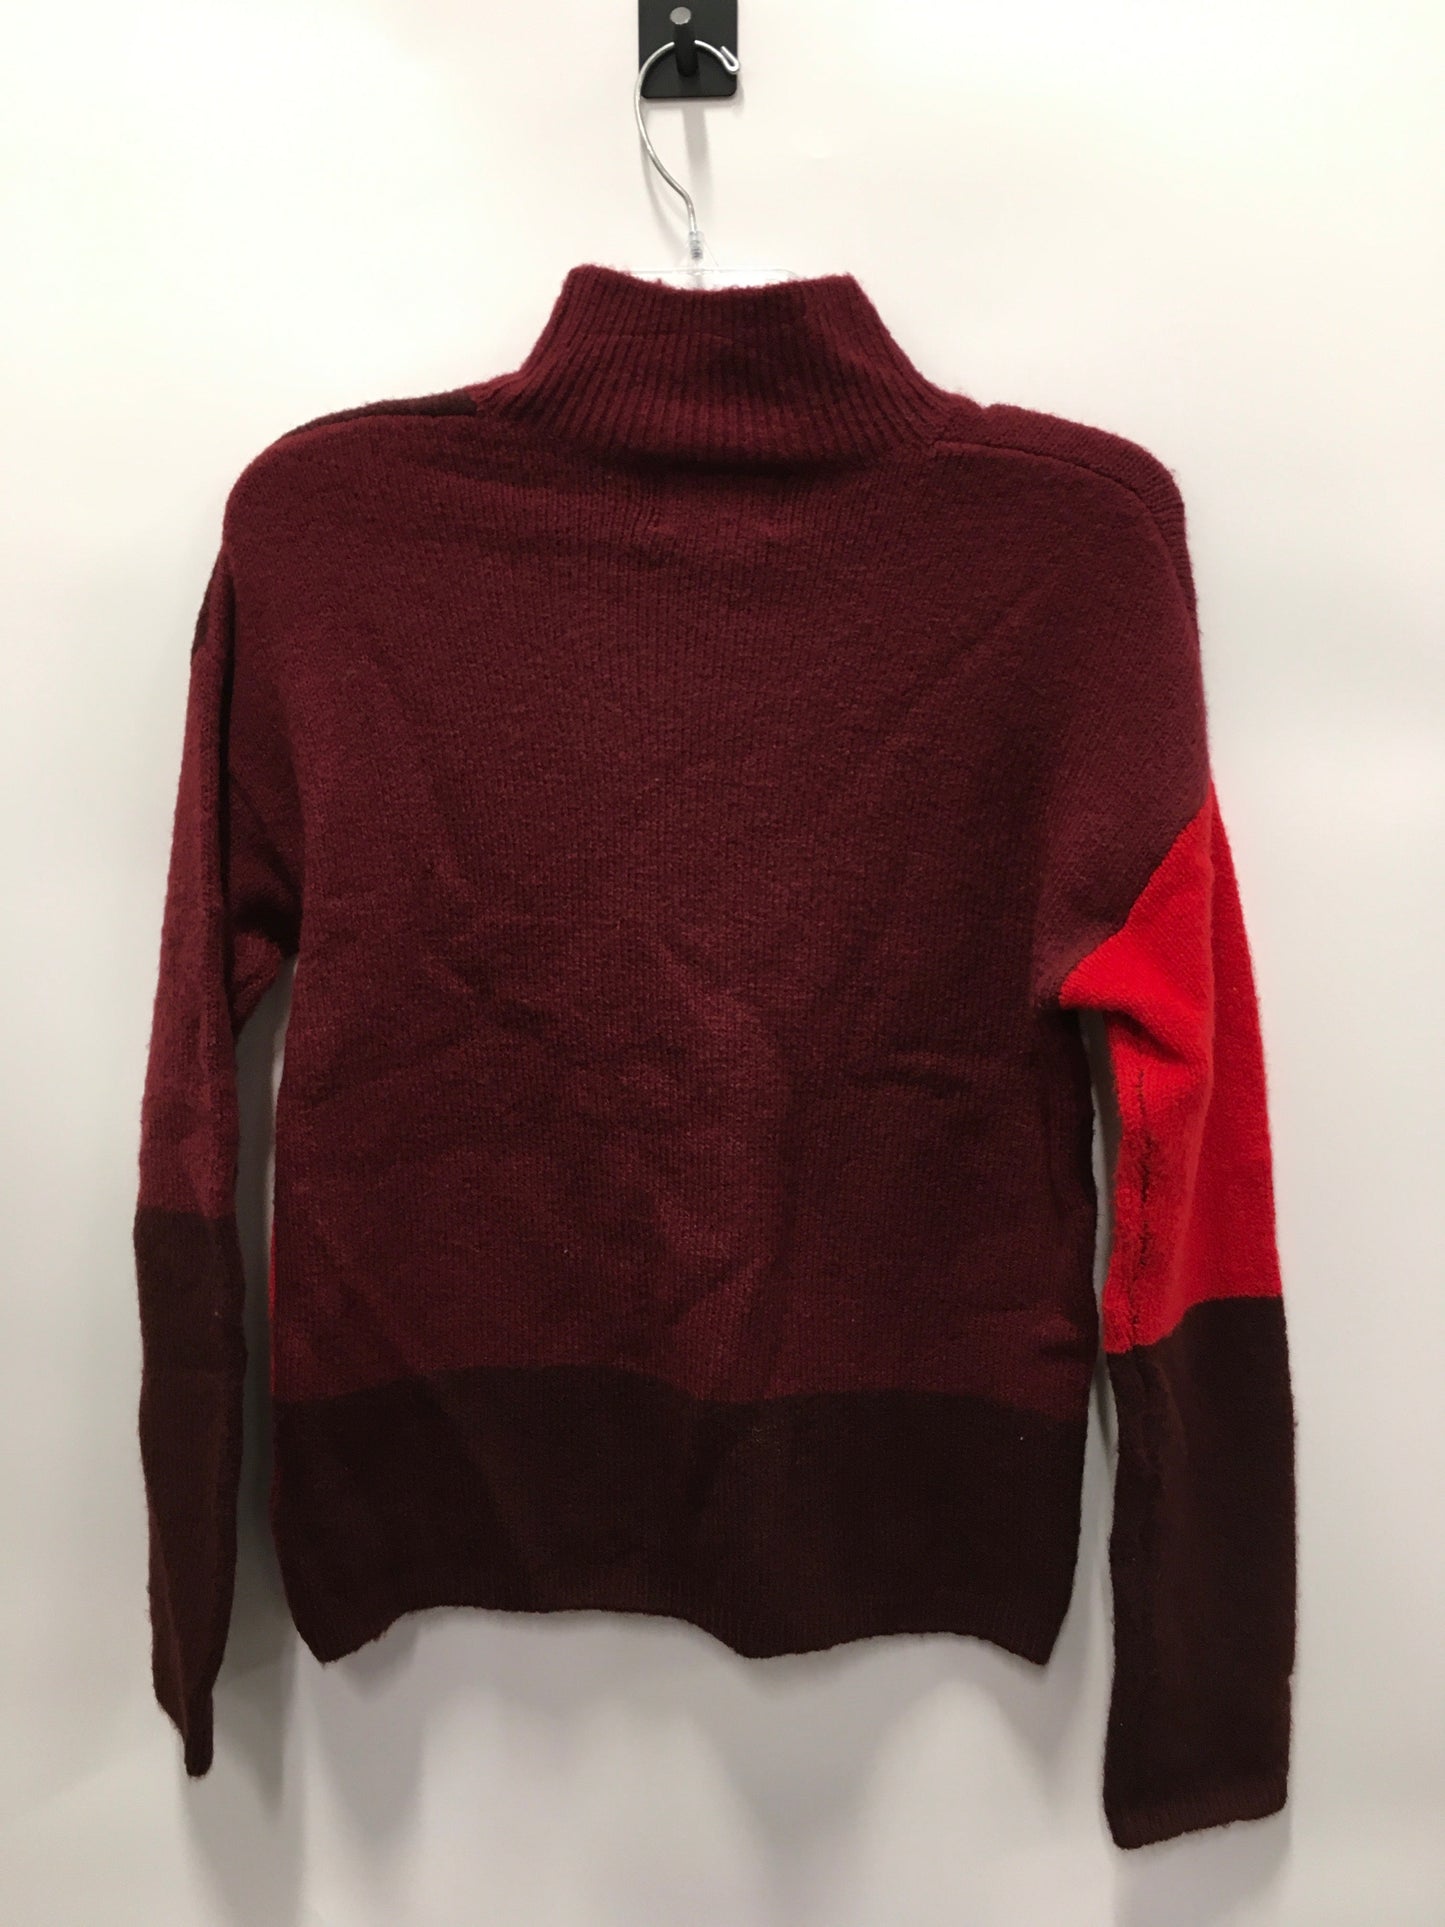 Red Sweater Cynthia Rowley, Size S